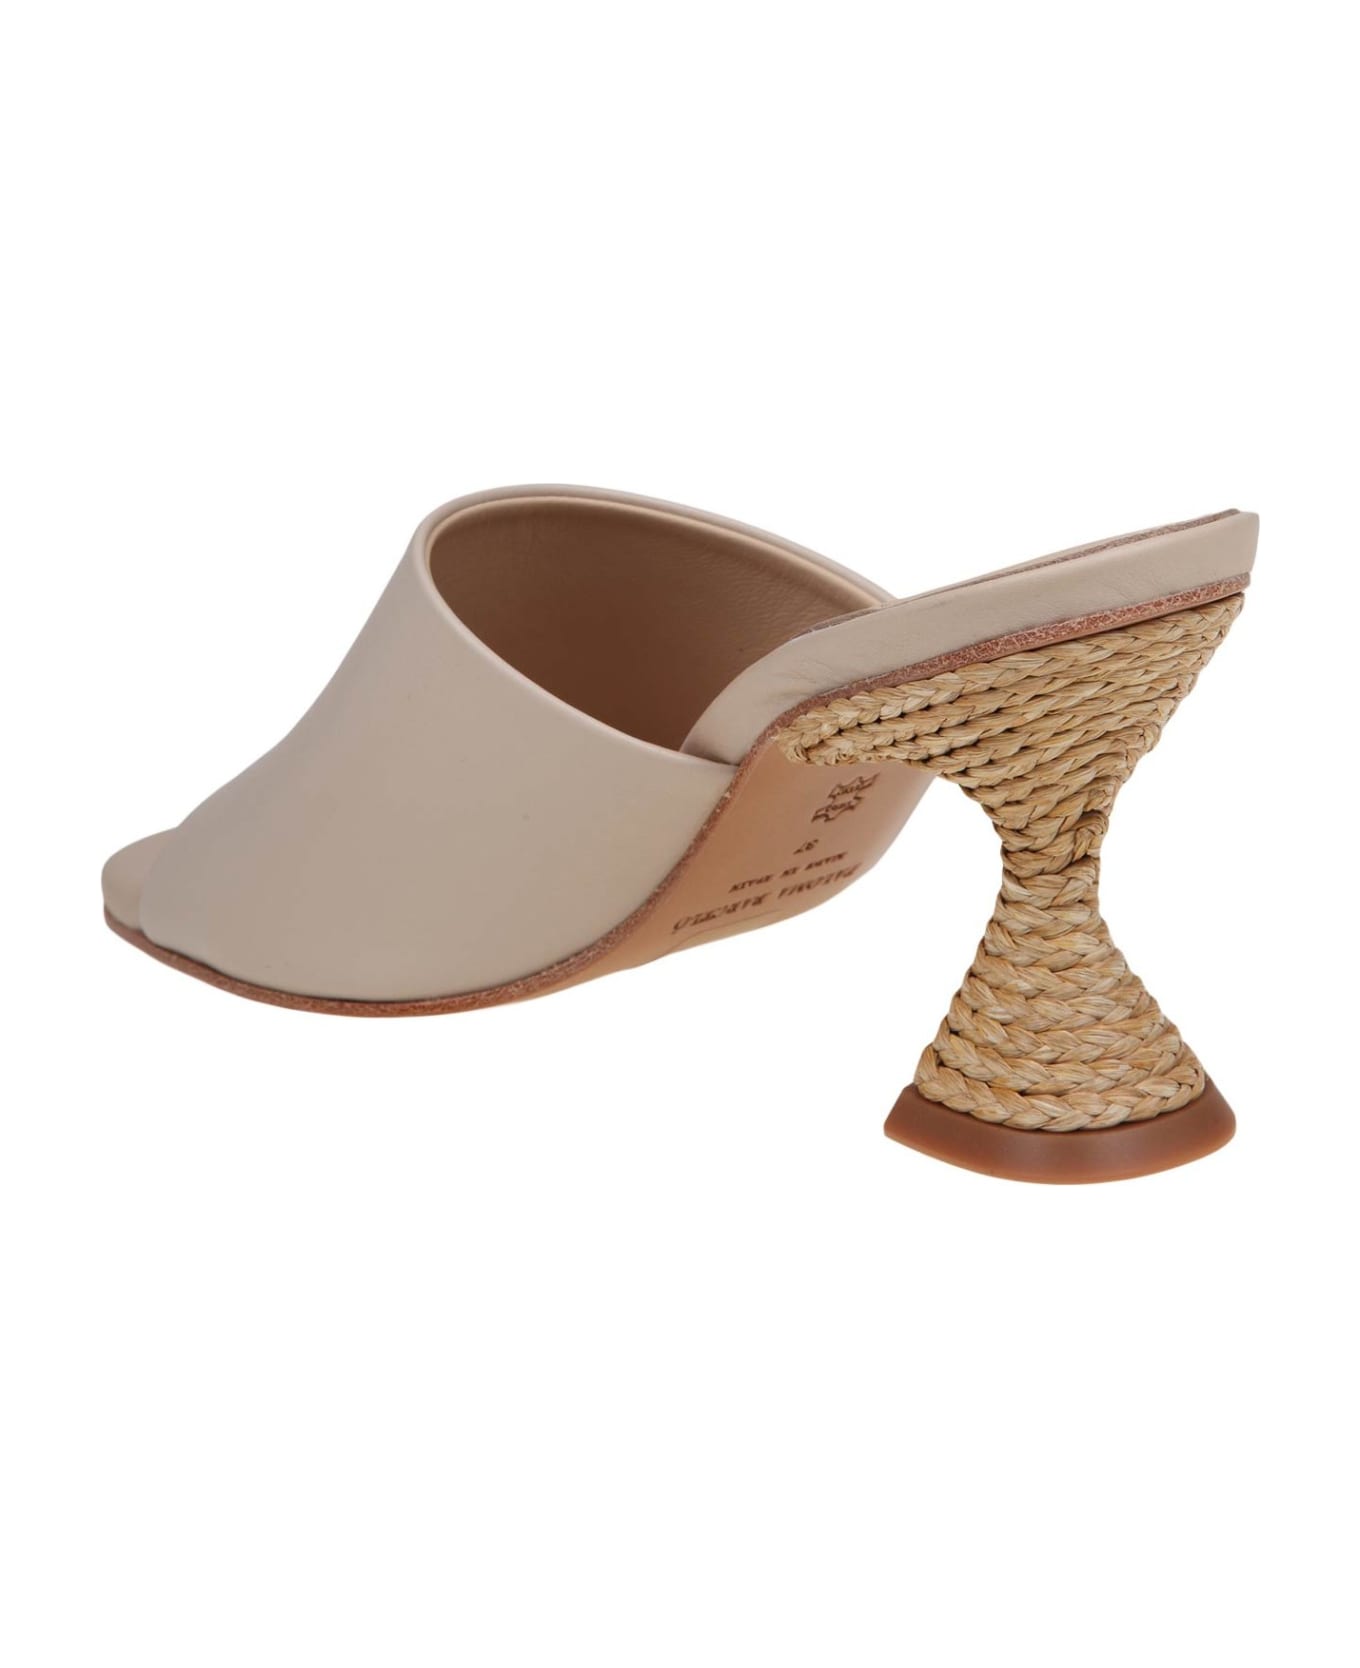 Paloma Barceló Brigite Mules In Ivory Leather - Ivory